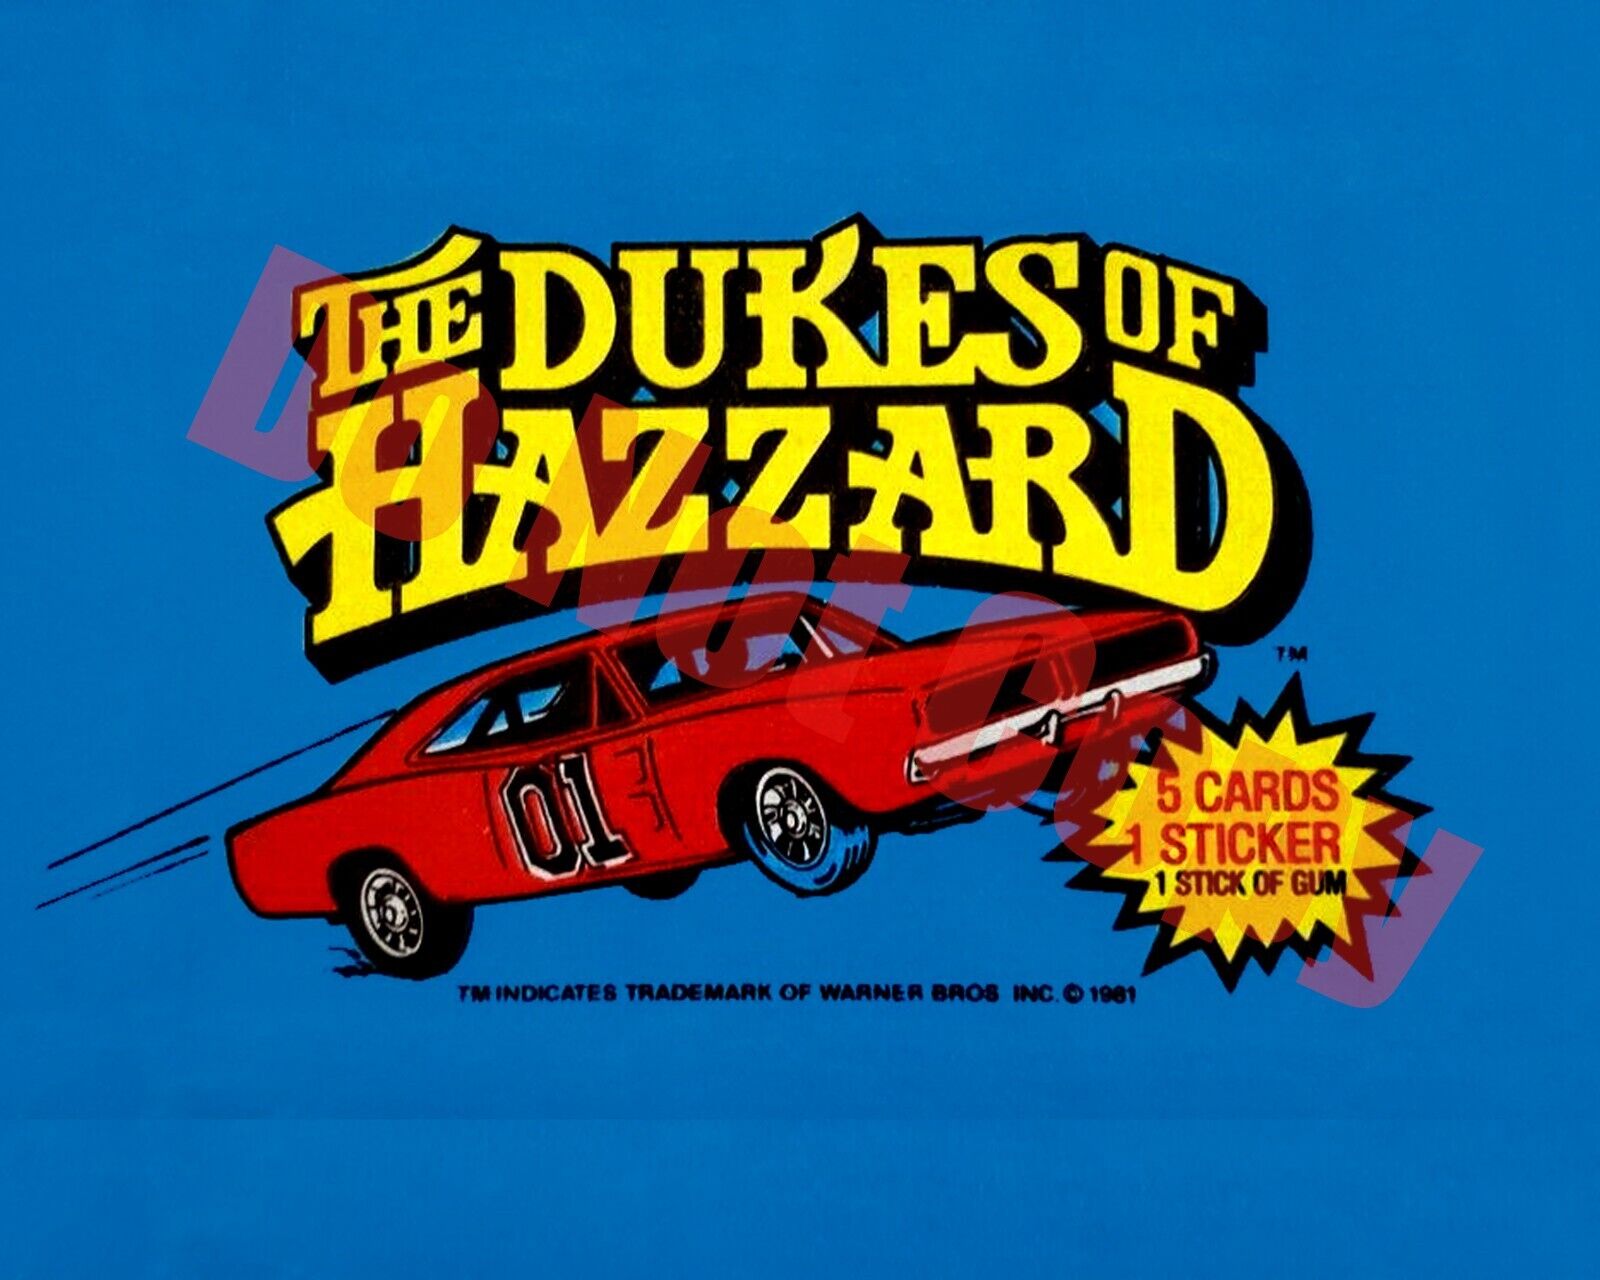 1981 DONRUSS THE DUKES OF HAZZARD TV Show General Lee Card Wrapper 8x10 Photo